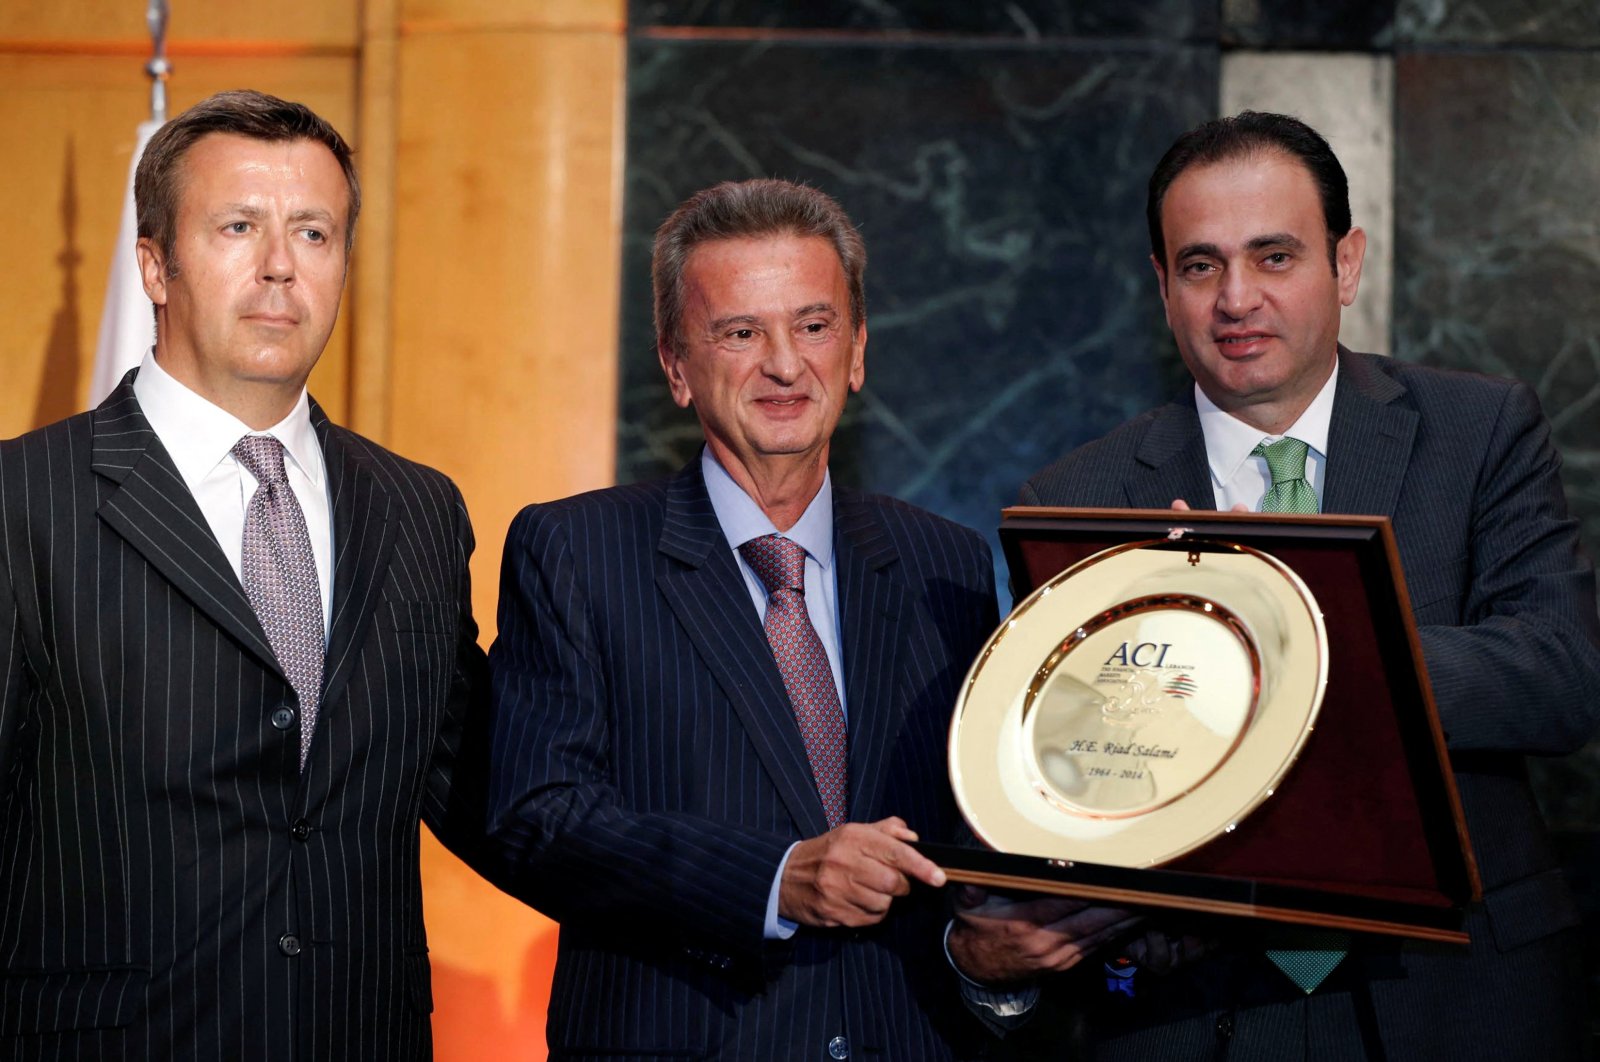 Lebanon&#039;s Central Bank Governor Riad Salameh (C) receives an honorary award from ACI President in Lebanon Naji Echo (R) as they pose with ACI Int&#039;l President Delegated Marshall Bailey during ACI Lebanon Golden Jubilee Grand Celebration, in Beirut, Lebanon, Sept. 1, 2014. (Reuters Photo)